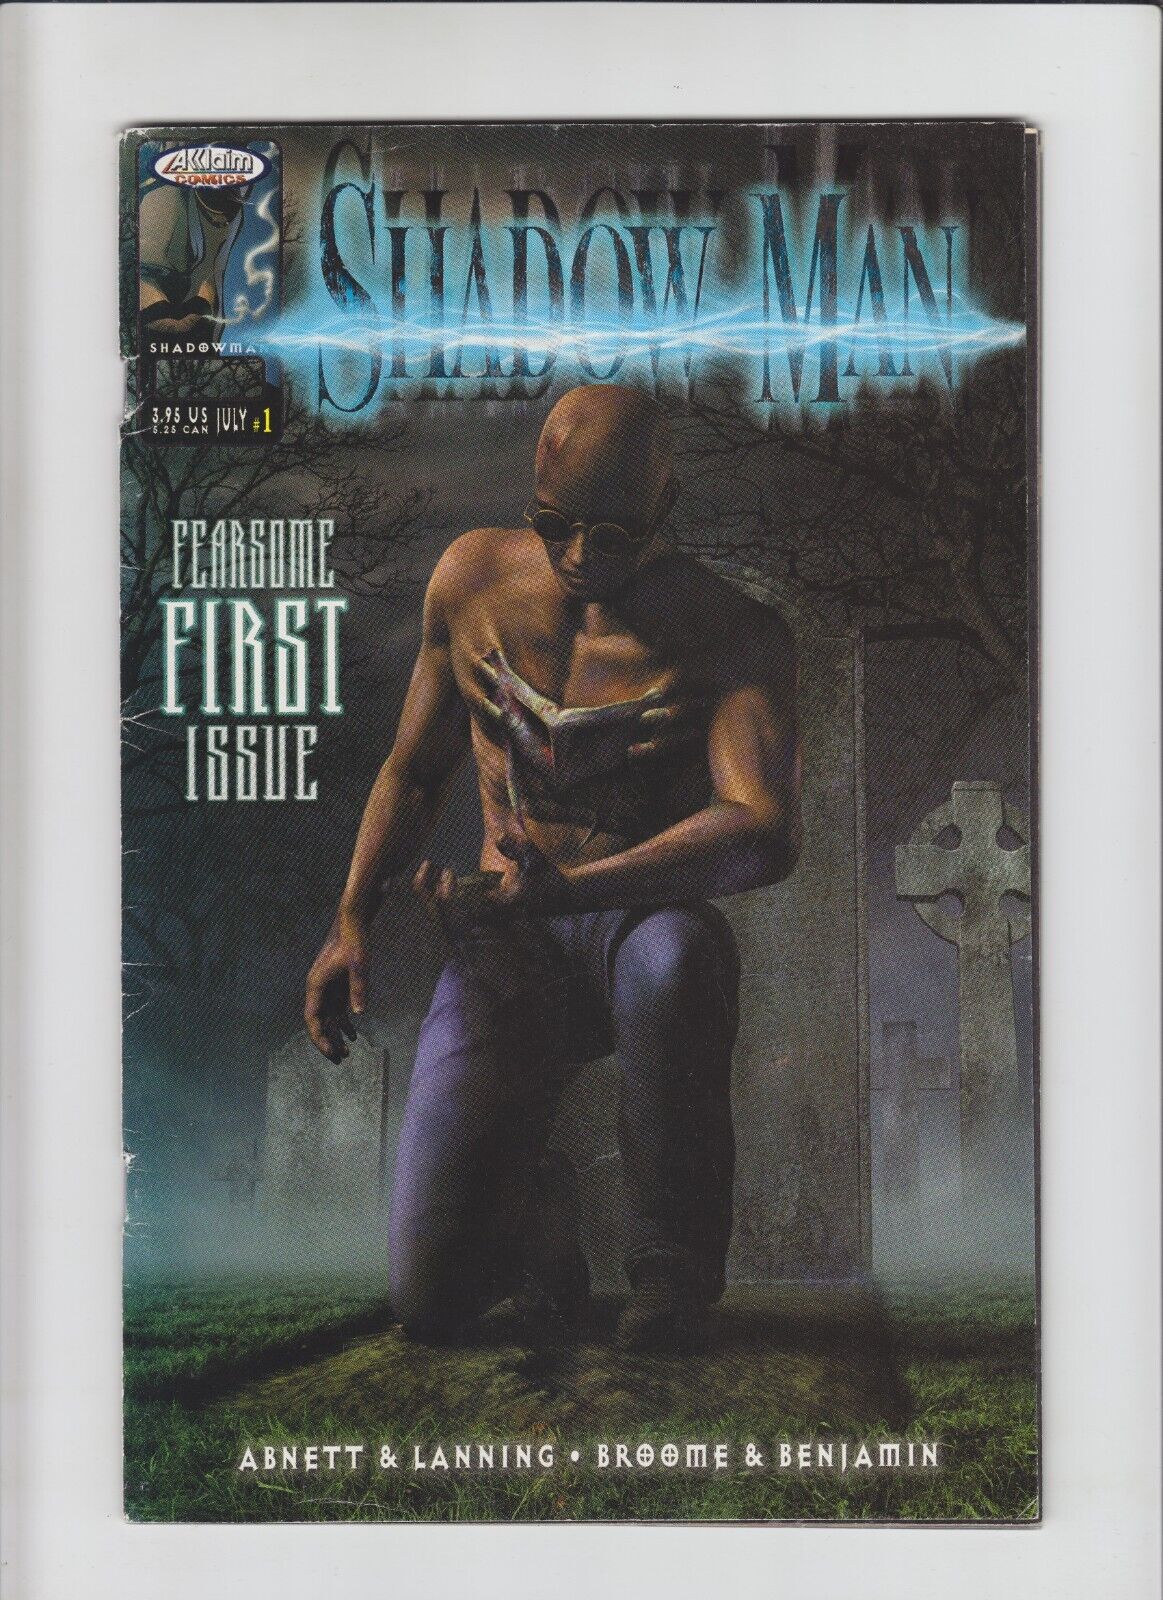 Shadowman Vol. 3 #1 variant WITH COVER PRICE Acclaim 1999 shadow man - low grade